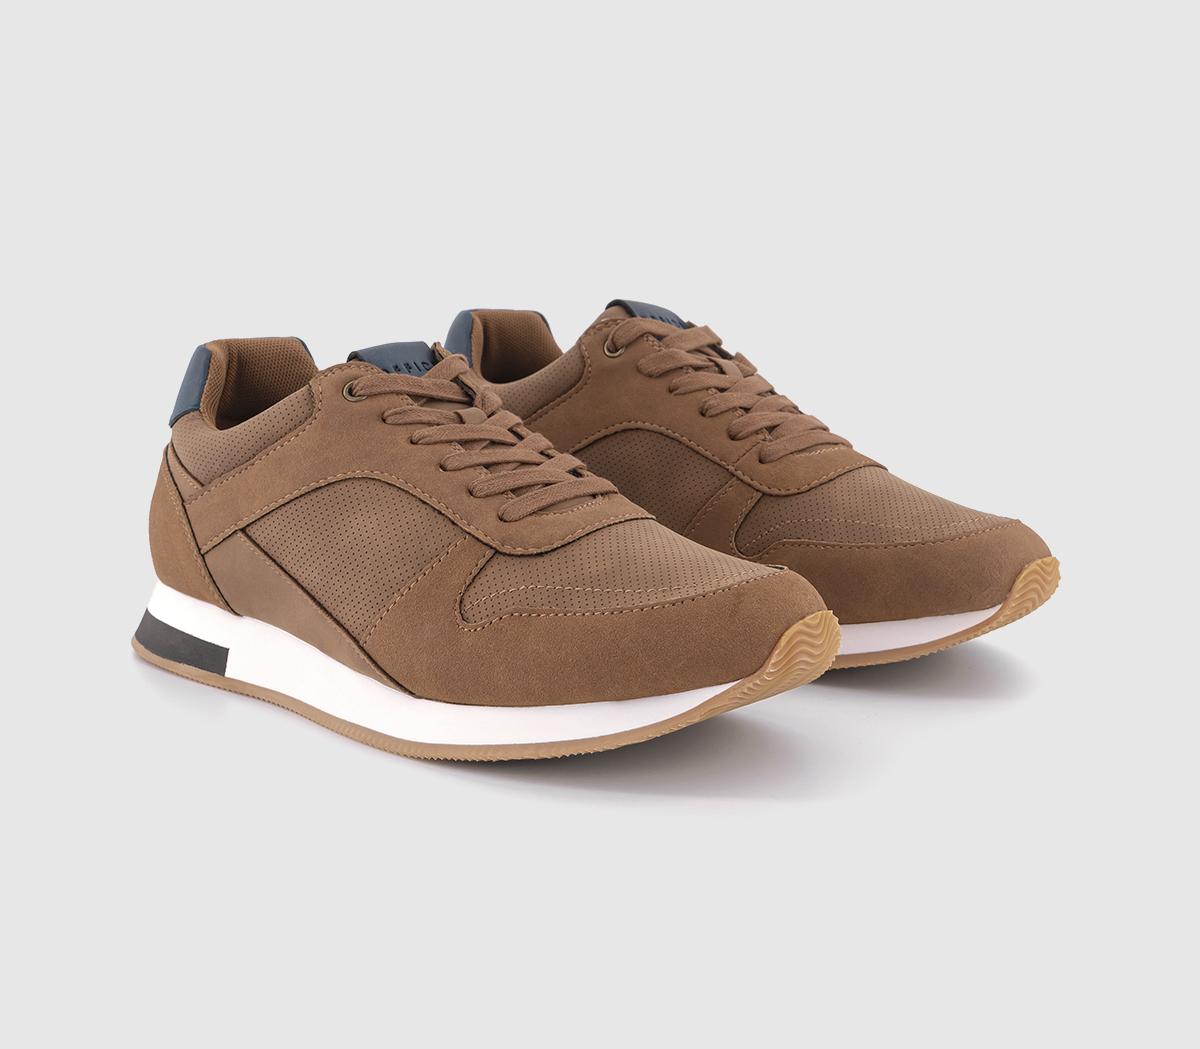 OFFICE Mens Cassidy Lightweight Trainers Tan, 12